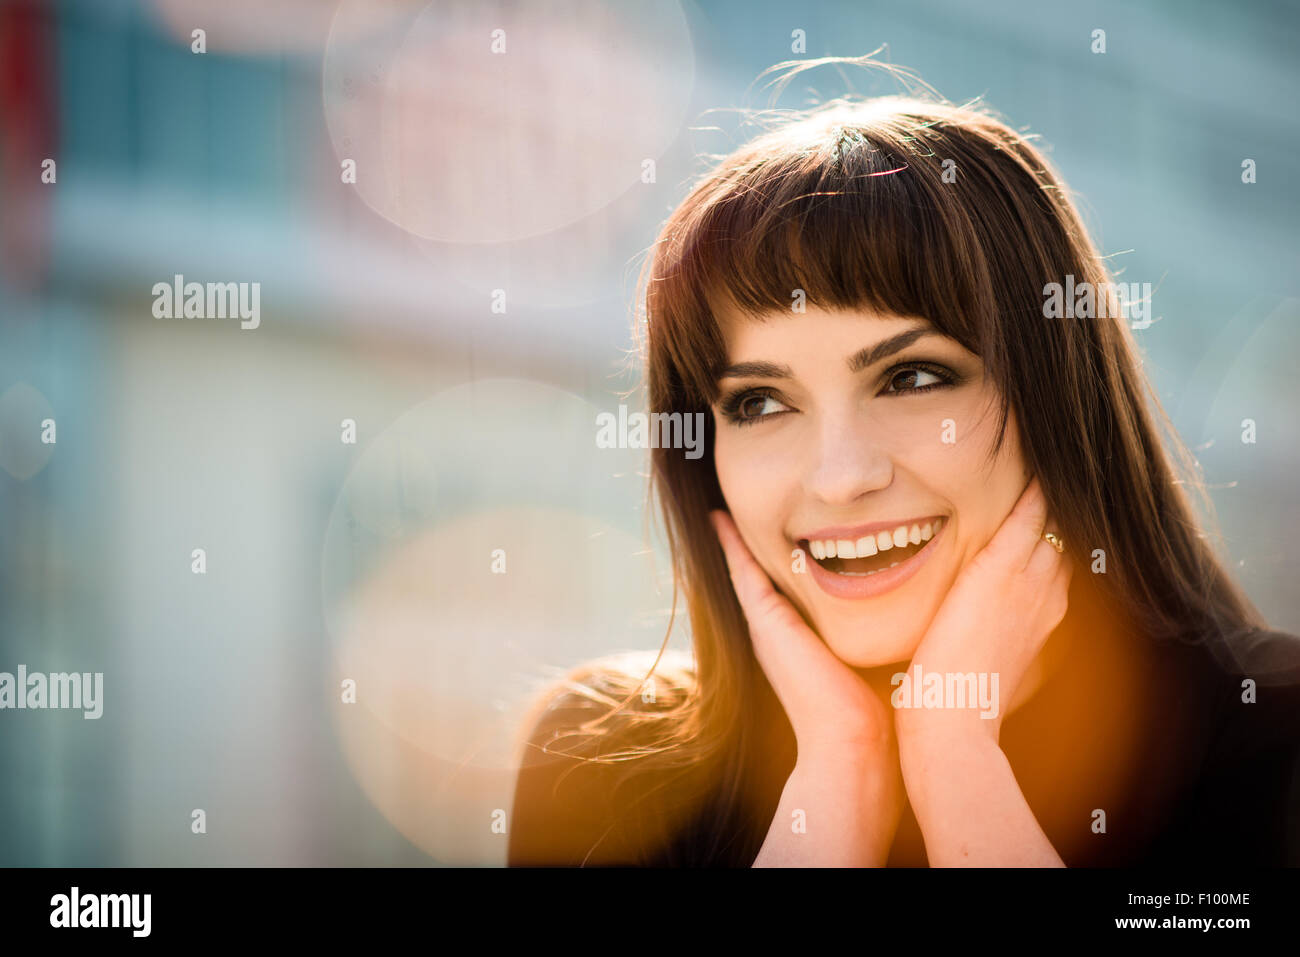 Portrait of smiling woman which is looking surprised with flare reflections Stock Photo